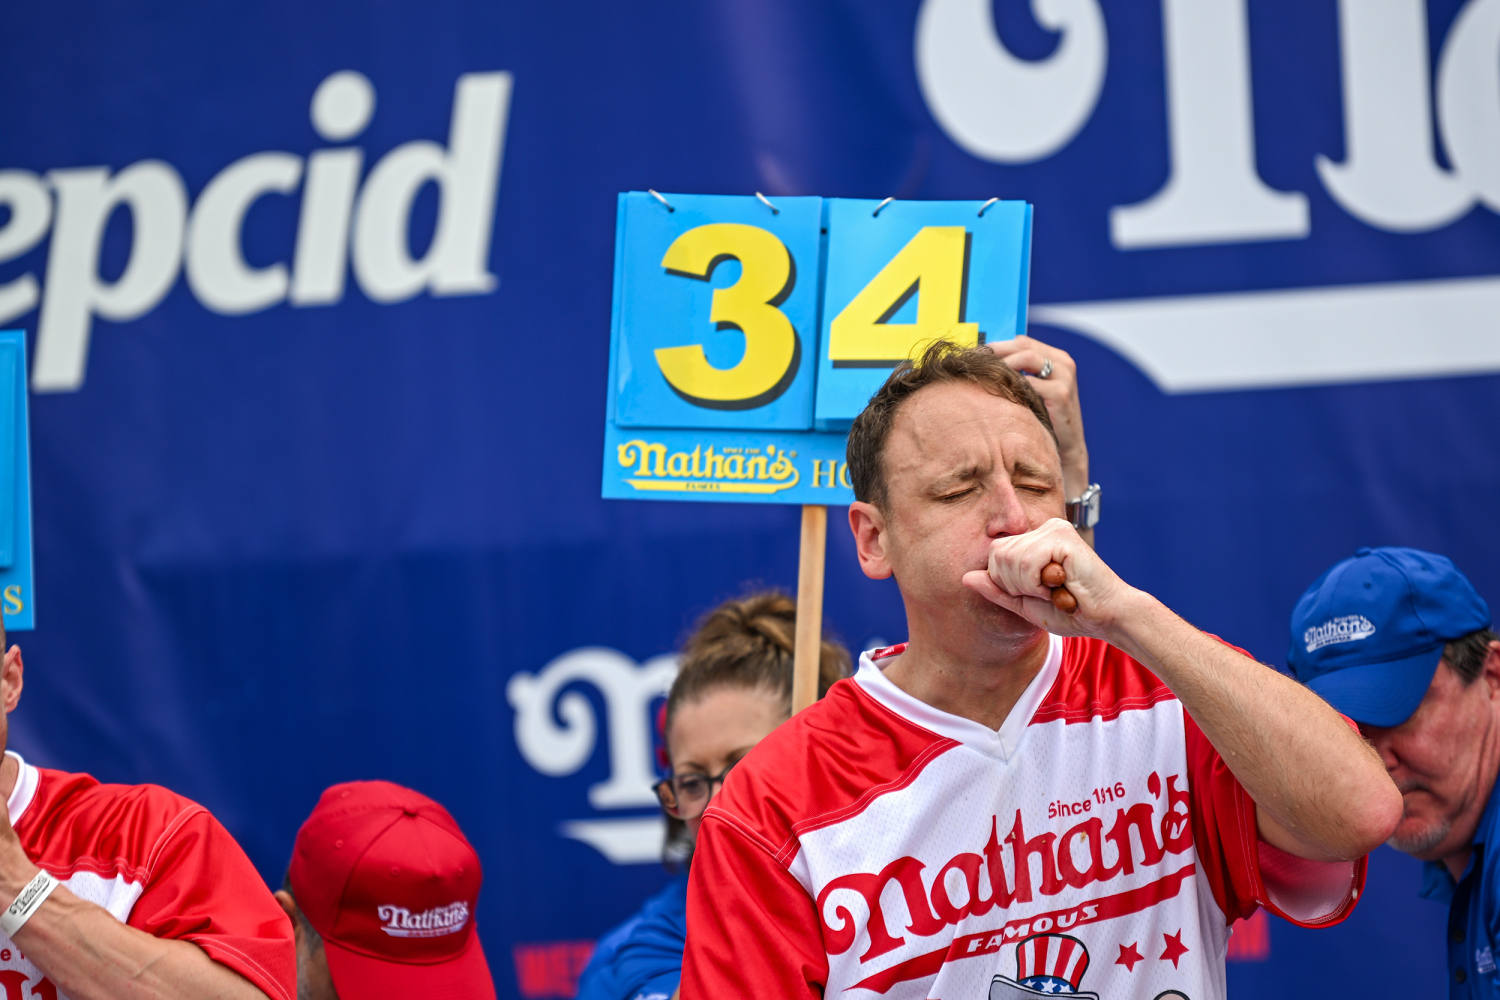 Joey Chestnut unable to compete in Nathan's Hot Dog Eating Contest after signing with plant-based food company